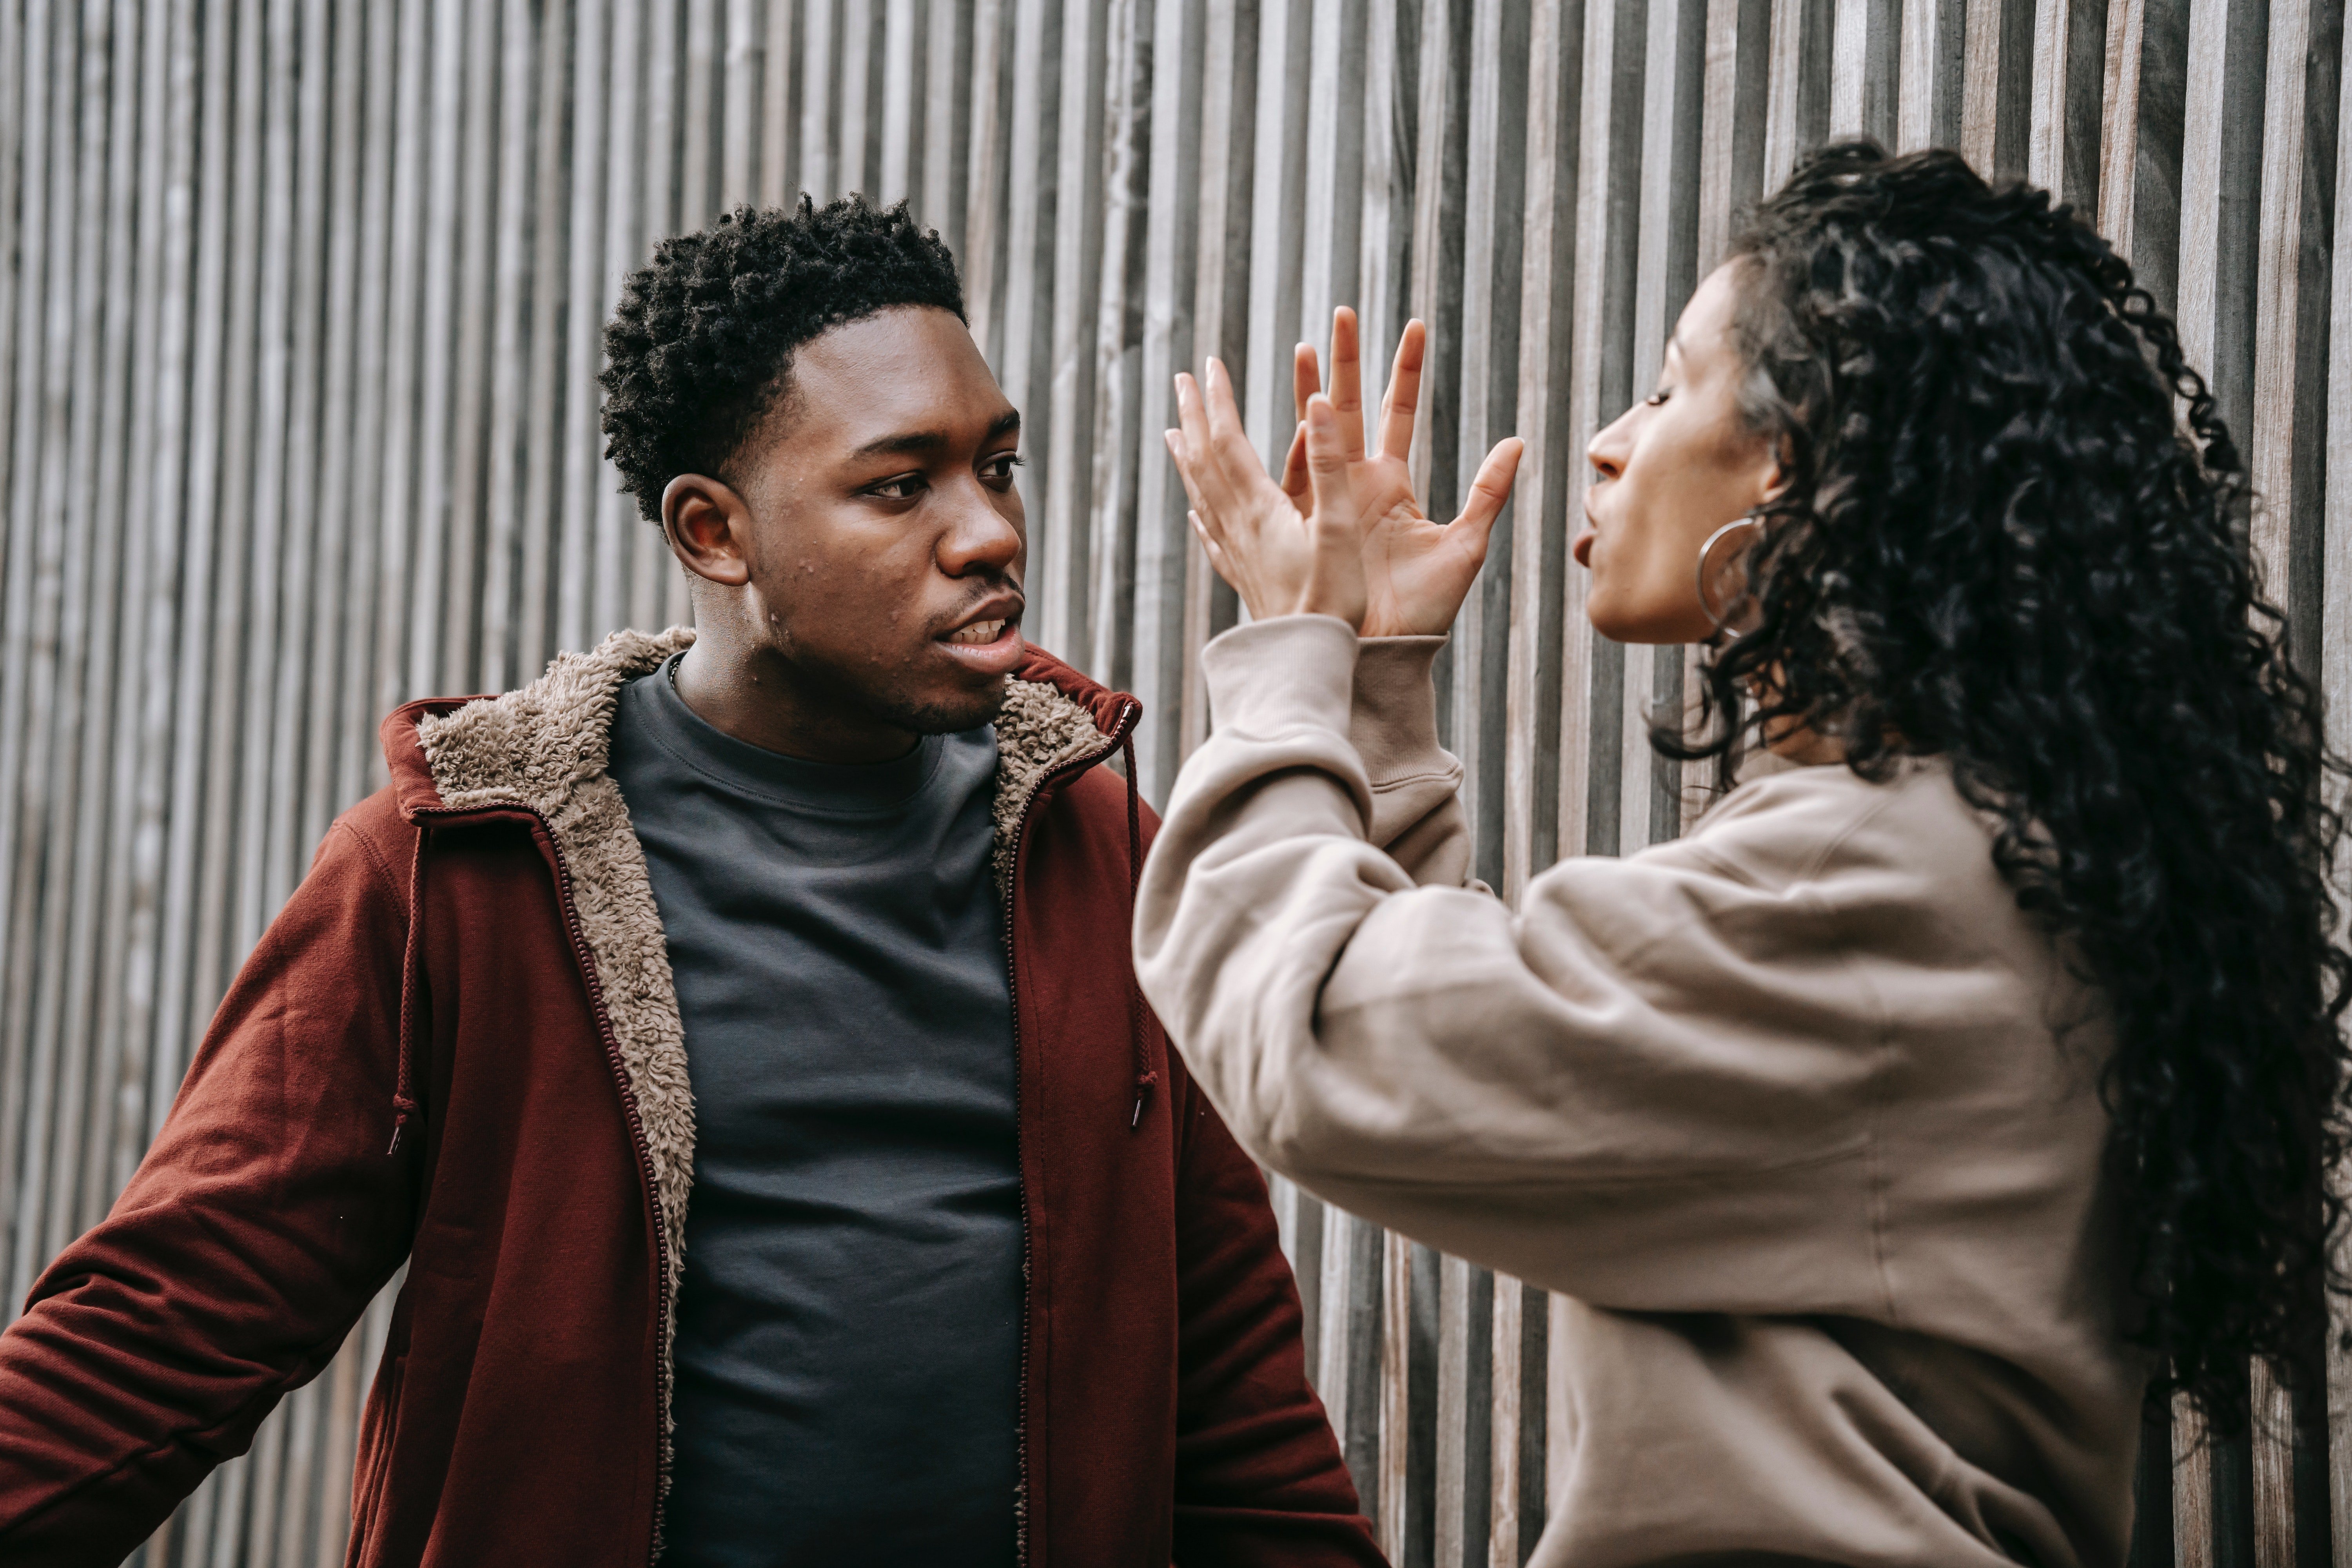 His girlfriend yelled at him when he confronted her. | Source: Pexels